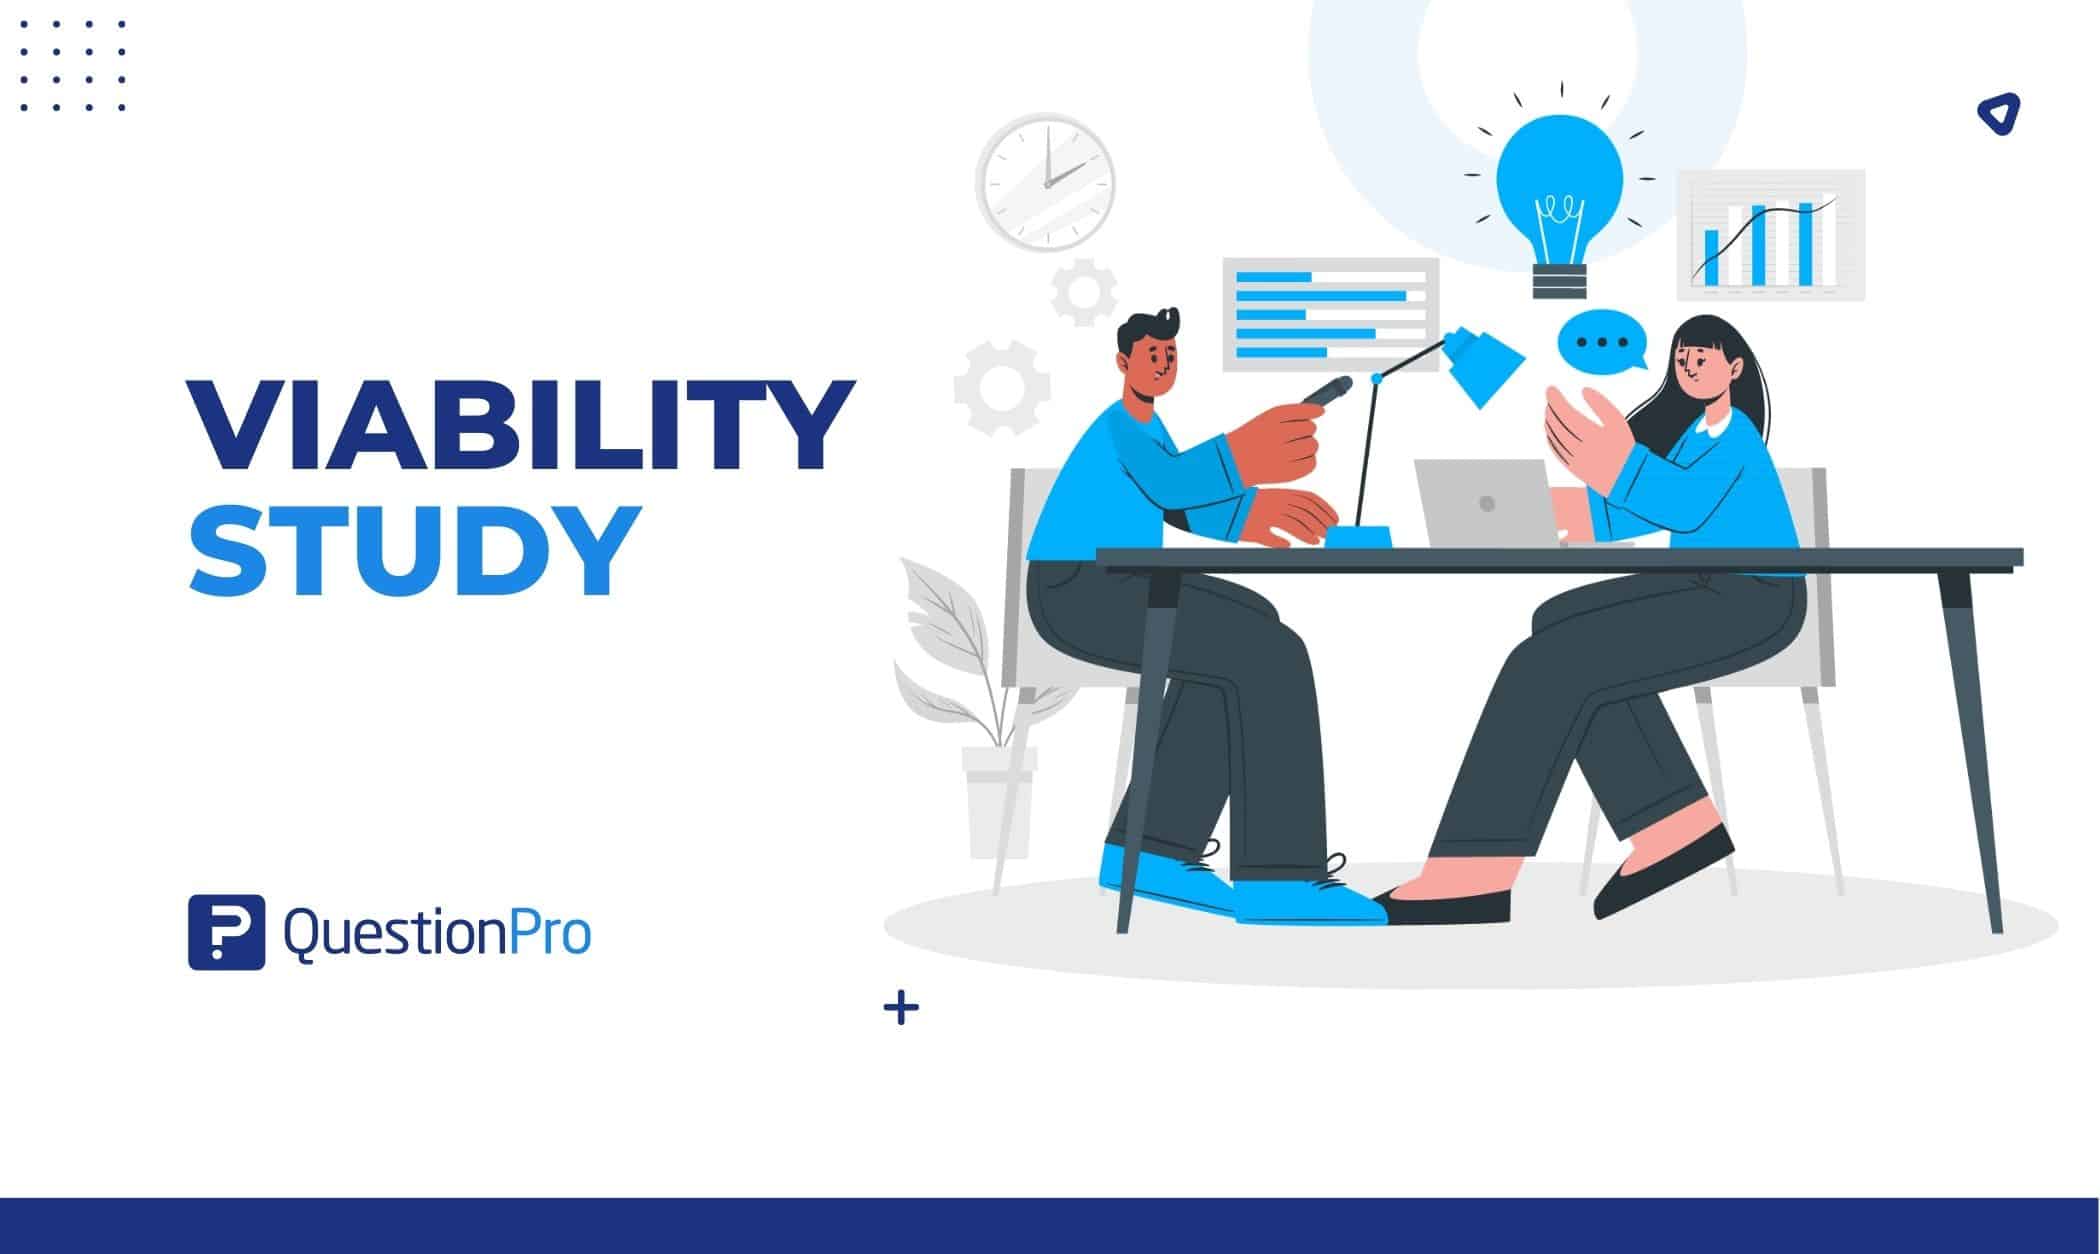 A viability study is a way to determine if a proposed project, product, or business will work and if it will succeed. Learn more here.